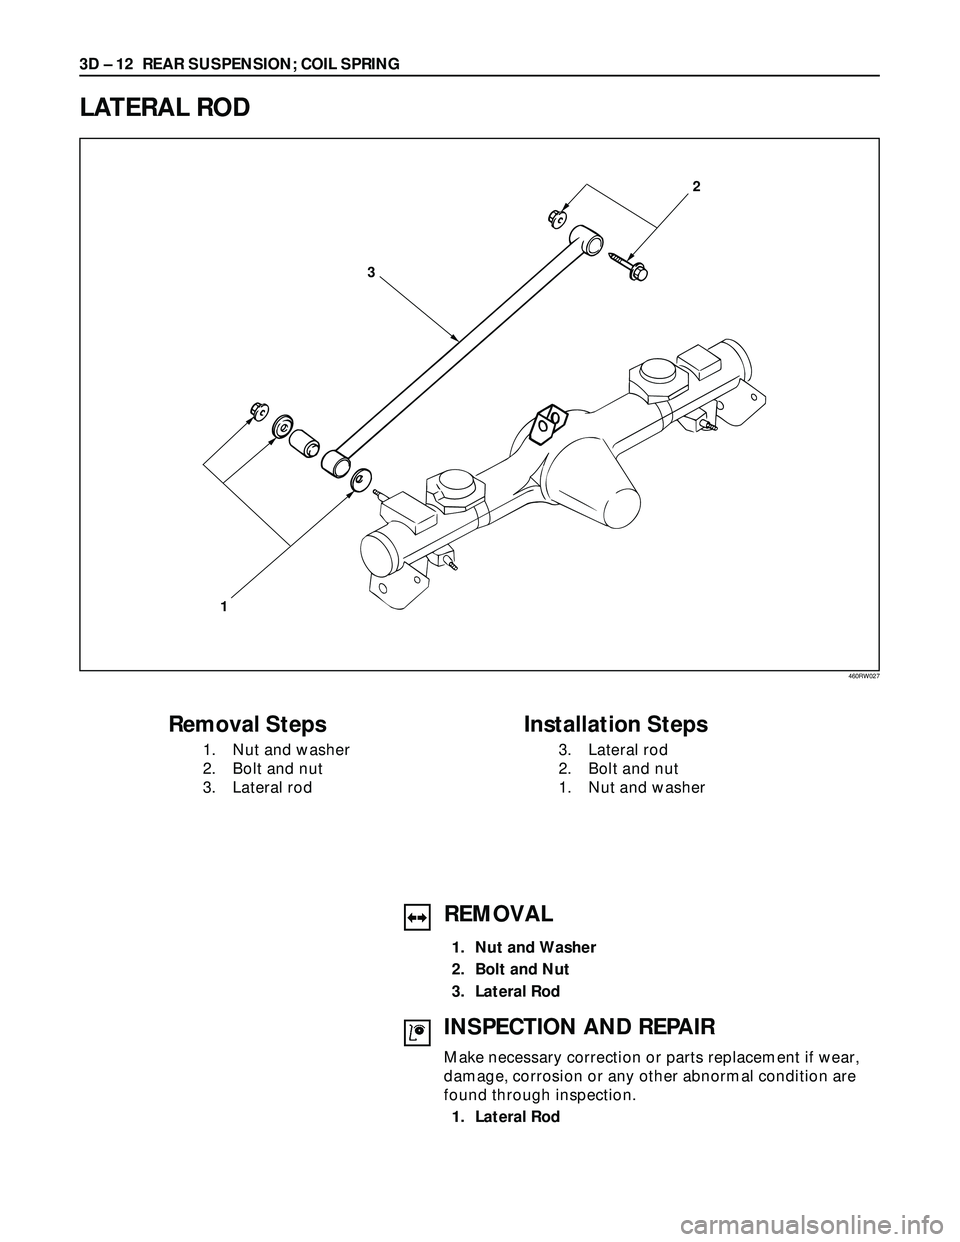 ISUZU TROOPER 1998  Service User Guide 3D – 12 REAR SUSPENSION; COIL SPRING
LATERAL ROD
132
Removal Steps
1. Nut and washer
2. Bolt and nut
3. Lateral rod
Installation Steps
3. Lateral rod
2. Bolt and nut
1. Nut and washer
REMOVAL
1. Nut